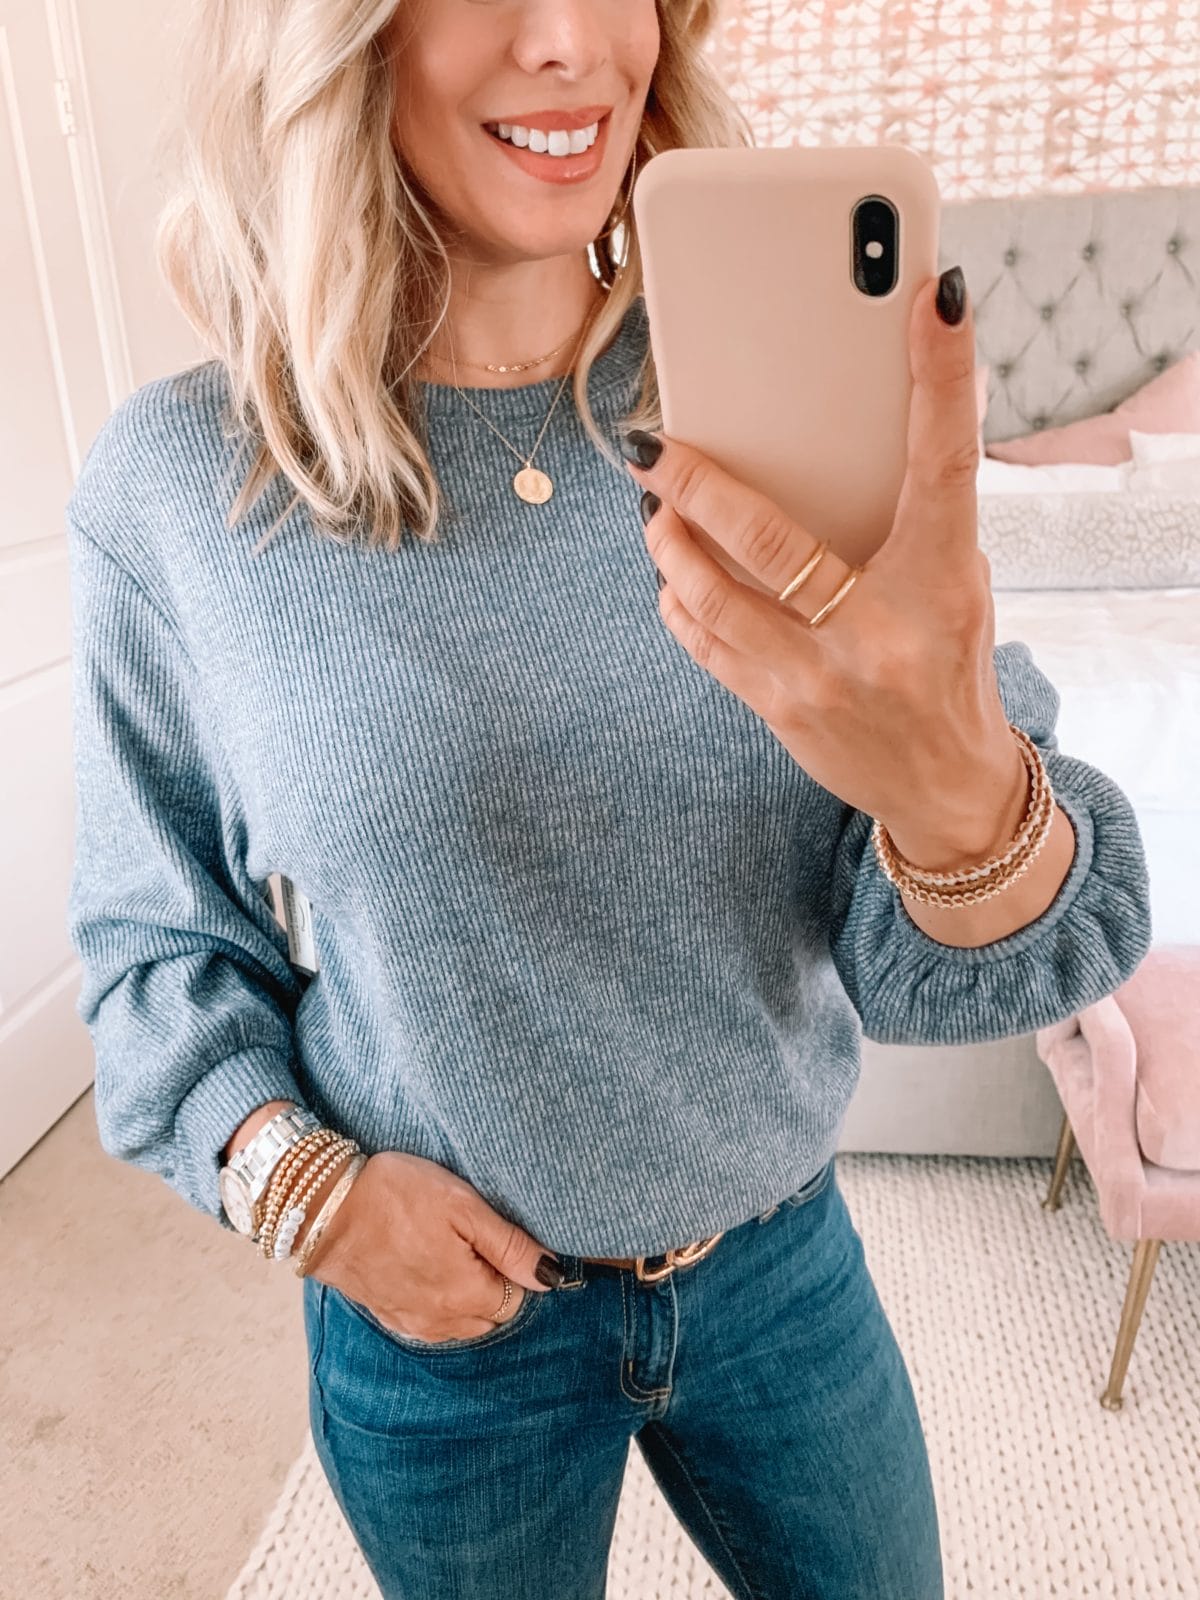 Amazon Fashion Faves, Blue Puff Sleeve Sweater, Jeans